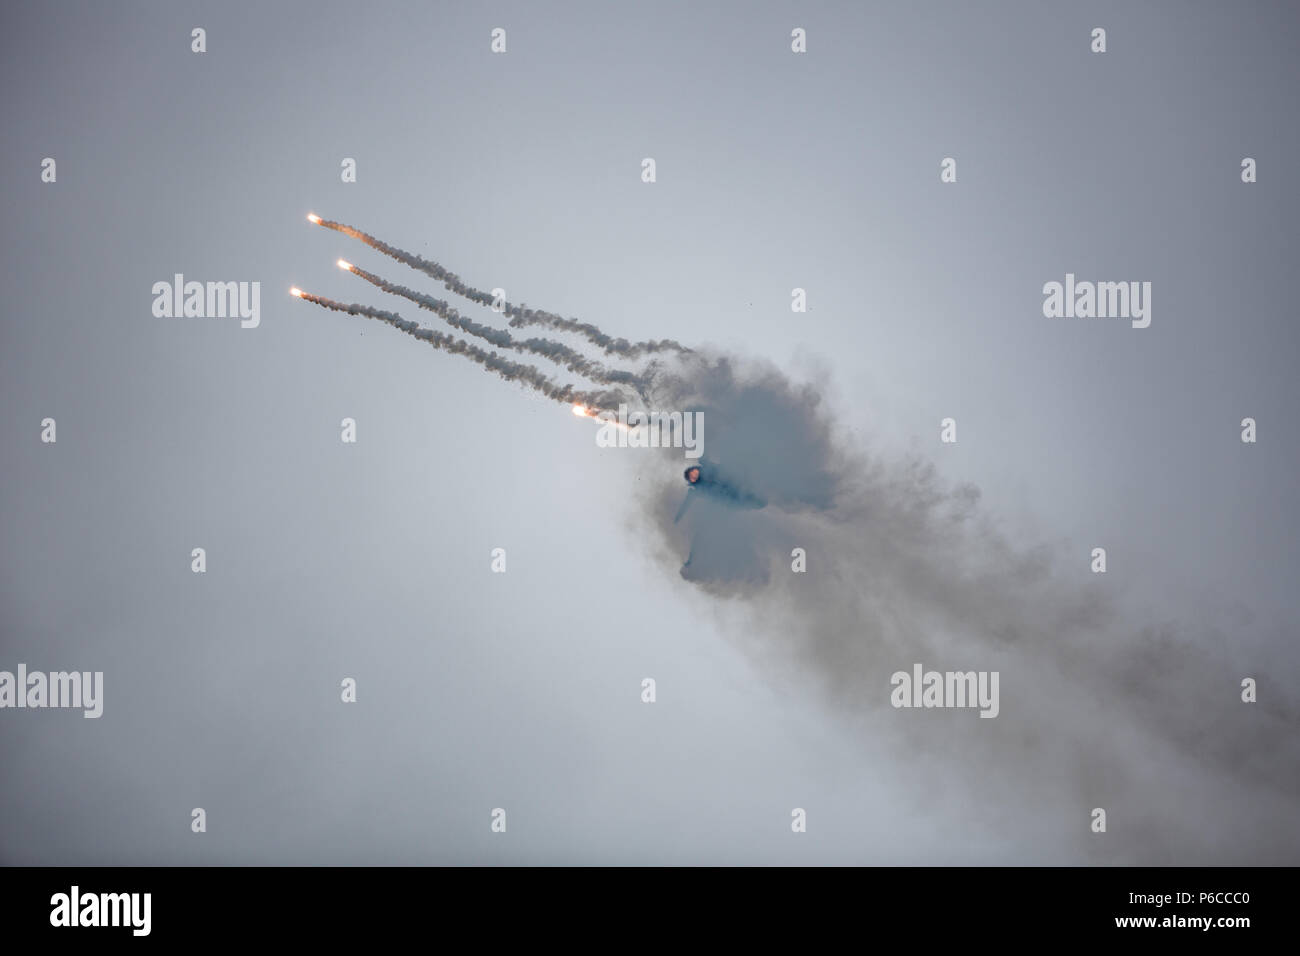 F 16 Fighting Fa High Resolution Stock Photography and Images - Alamy